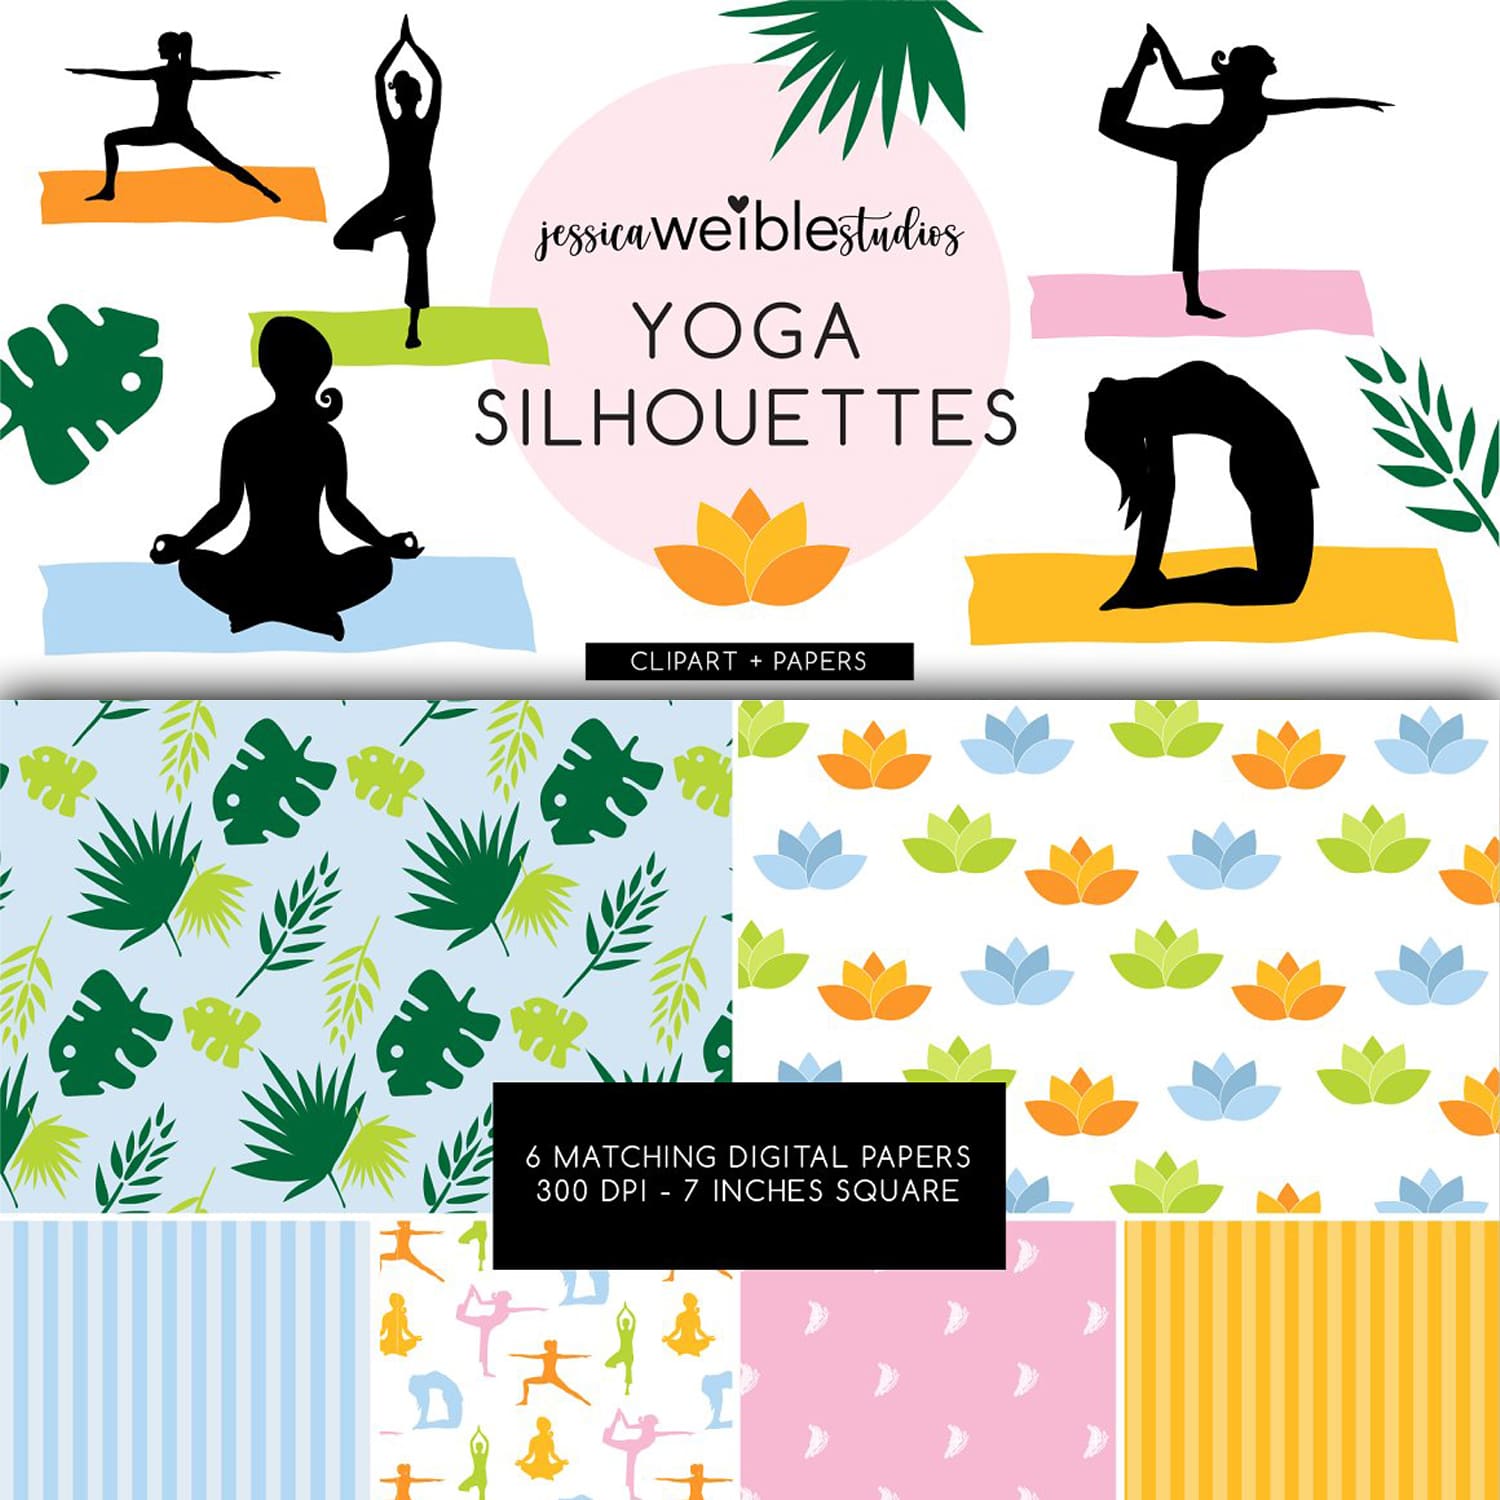 Yoga silhouettes - main image preview.